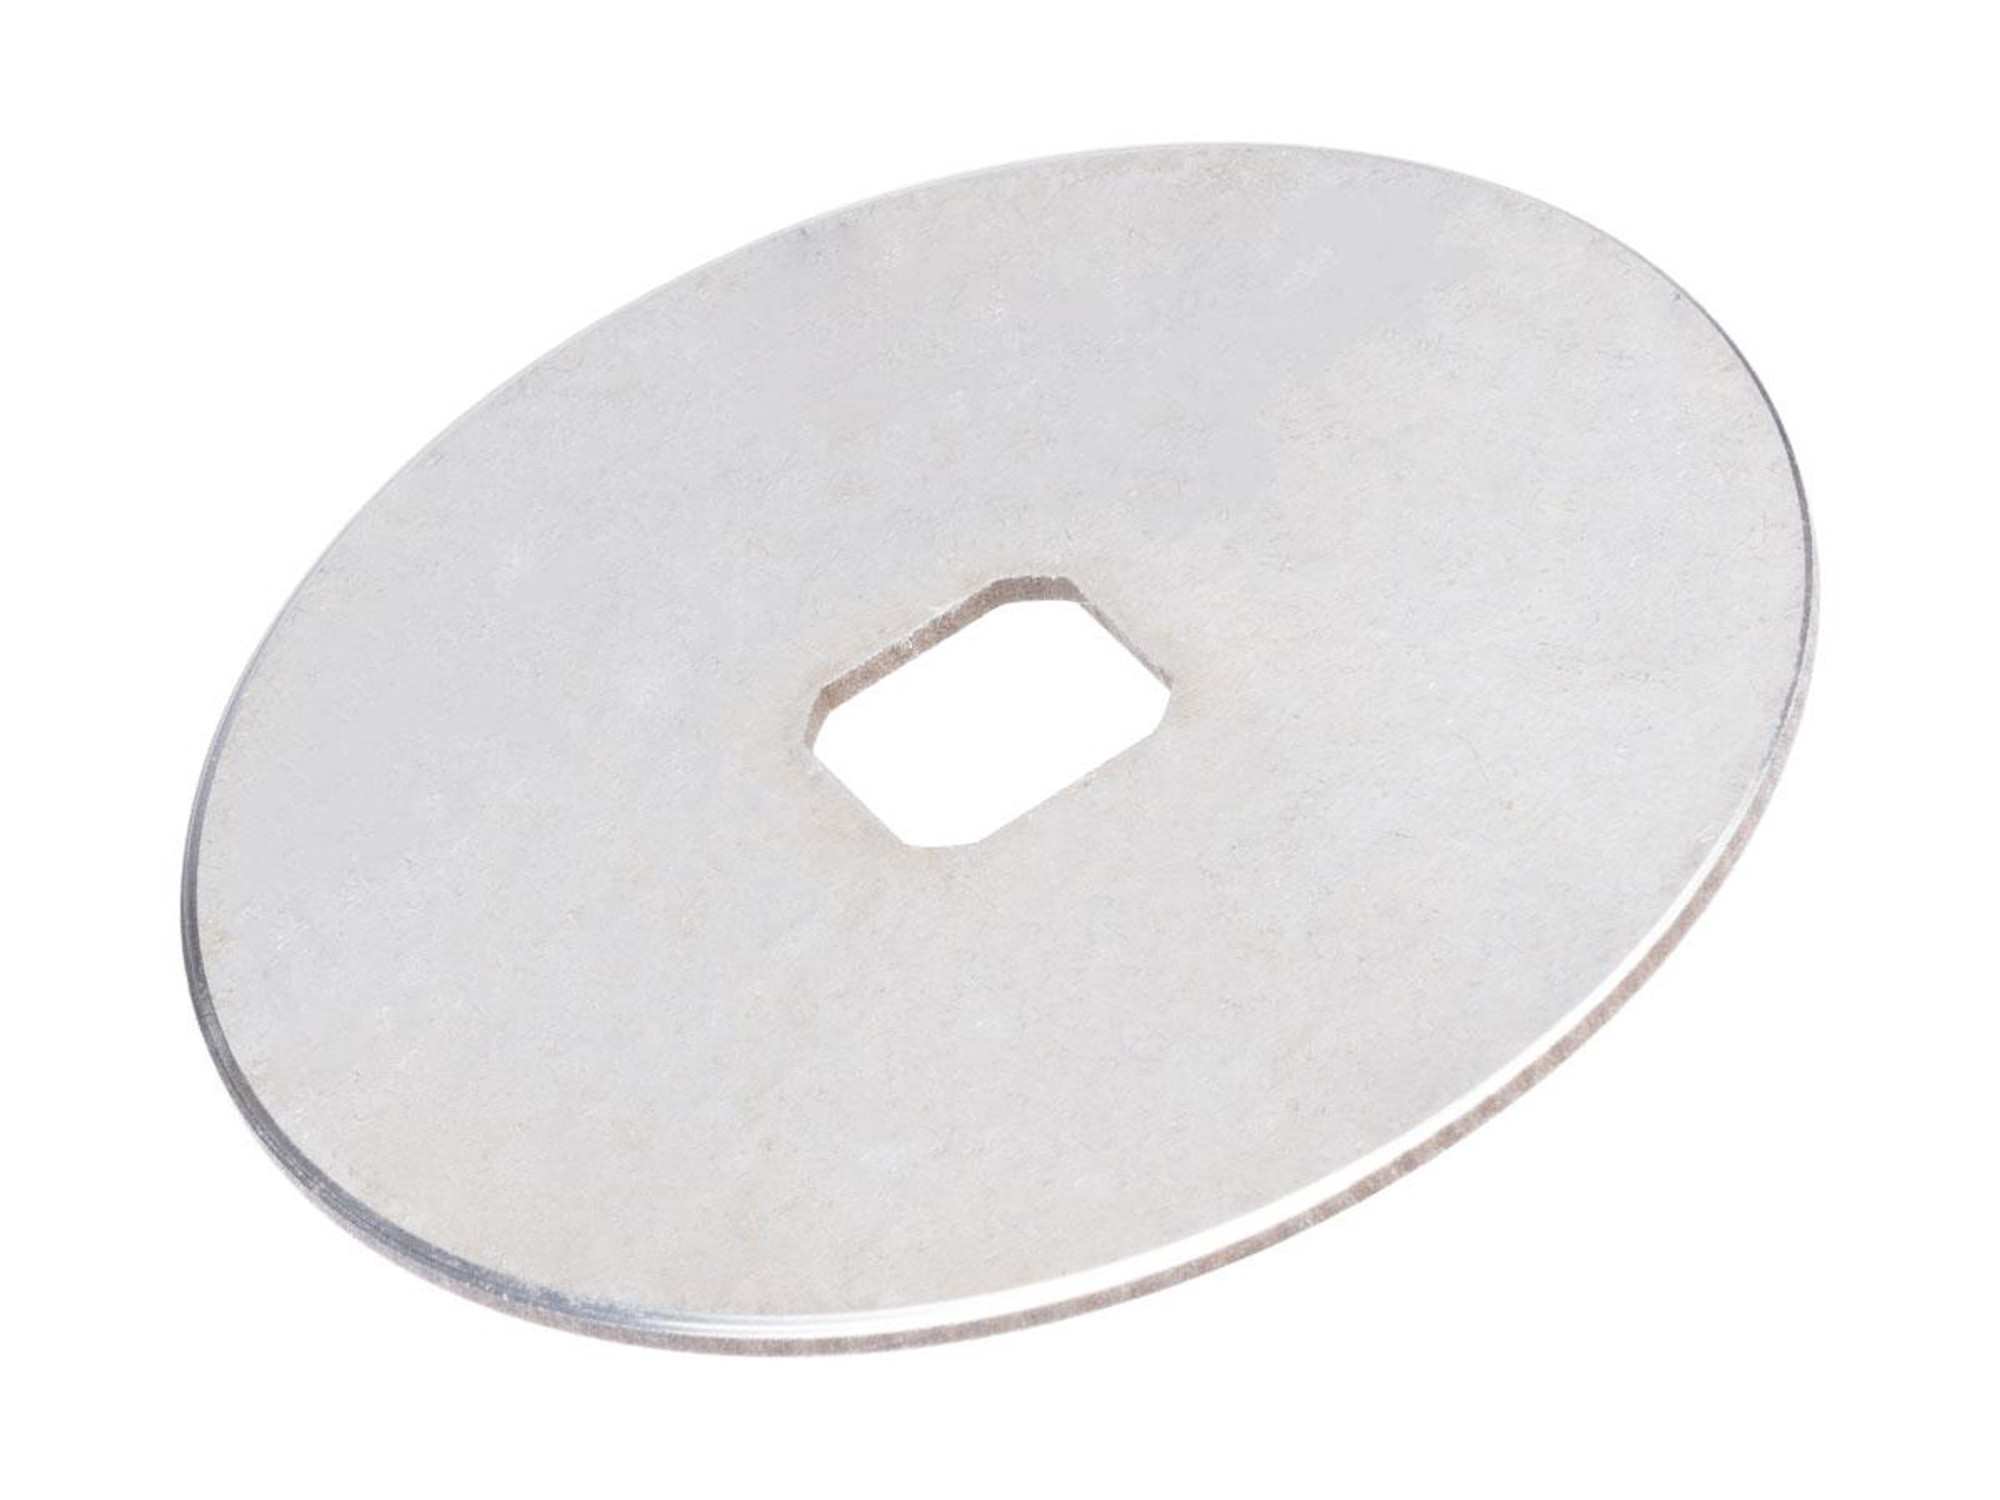 Jigging Master Reel Replacement Parts (Part: #235 / Rear Drag Plate)